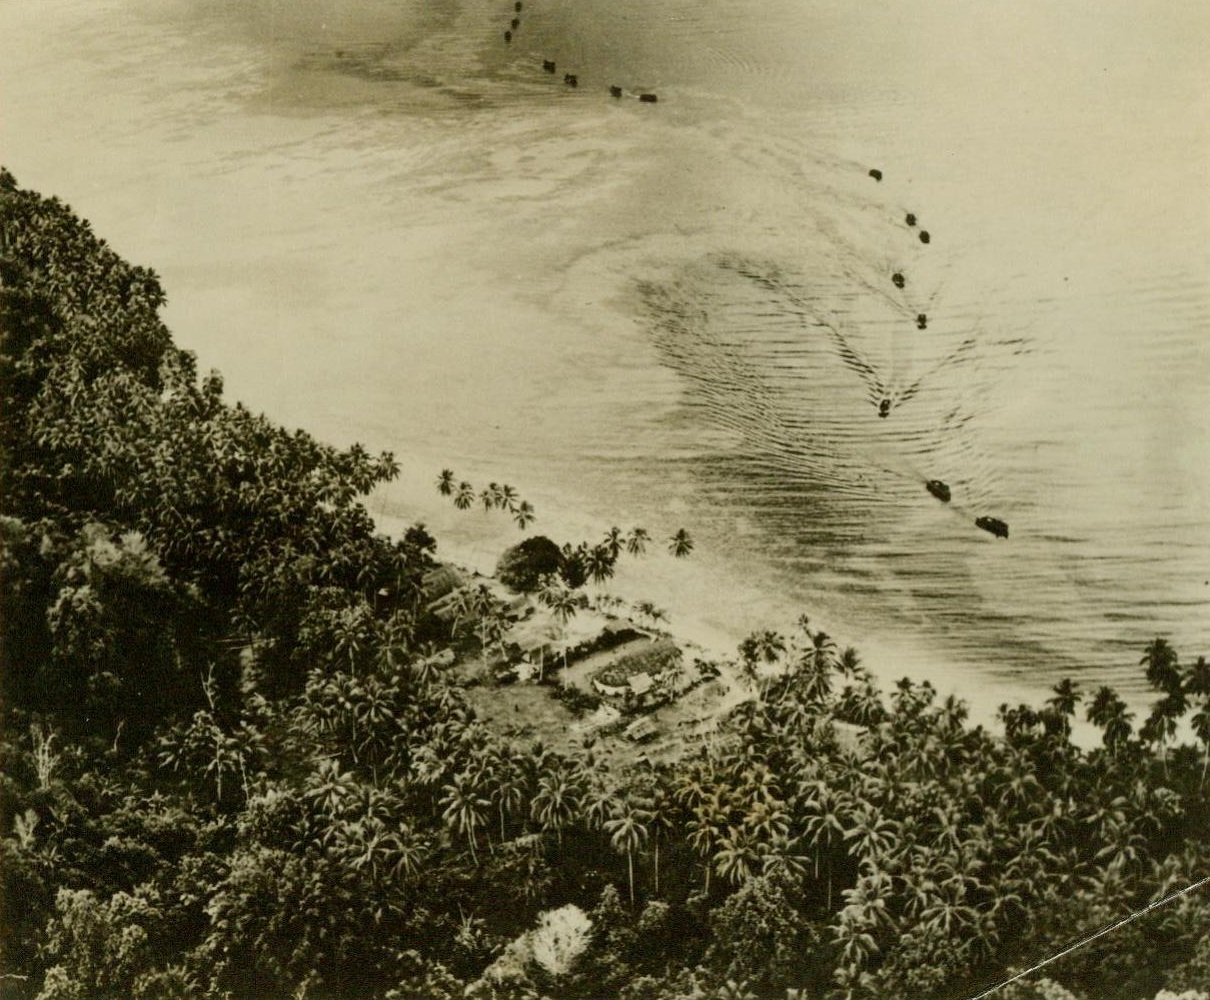 How the Marines landed, 10/17/1942. SOLOMON ISLANDS – Troop-carrying barges zig zag up to the beach of Florida Island to land the U.S. Marines in the initial stages of the Solomon Battle. The Marines occupied vital areas on both Florida and Guadalcanal and are now encountering heavy Jap attacks for the possession of the important Lunga Airport on Guadalcanal. CREDIT (Official US Navy photo from ACME) 10/17/42;